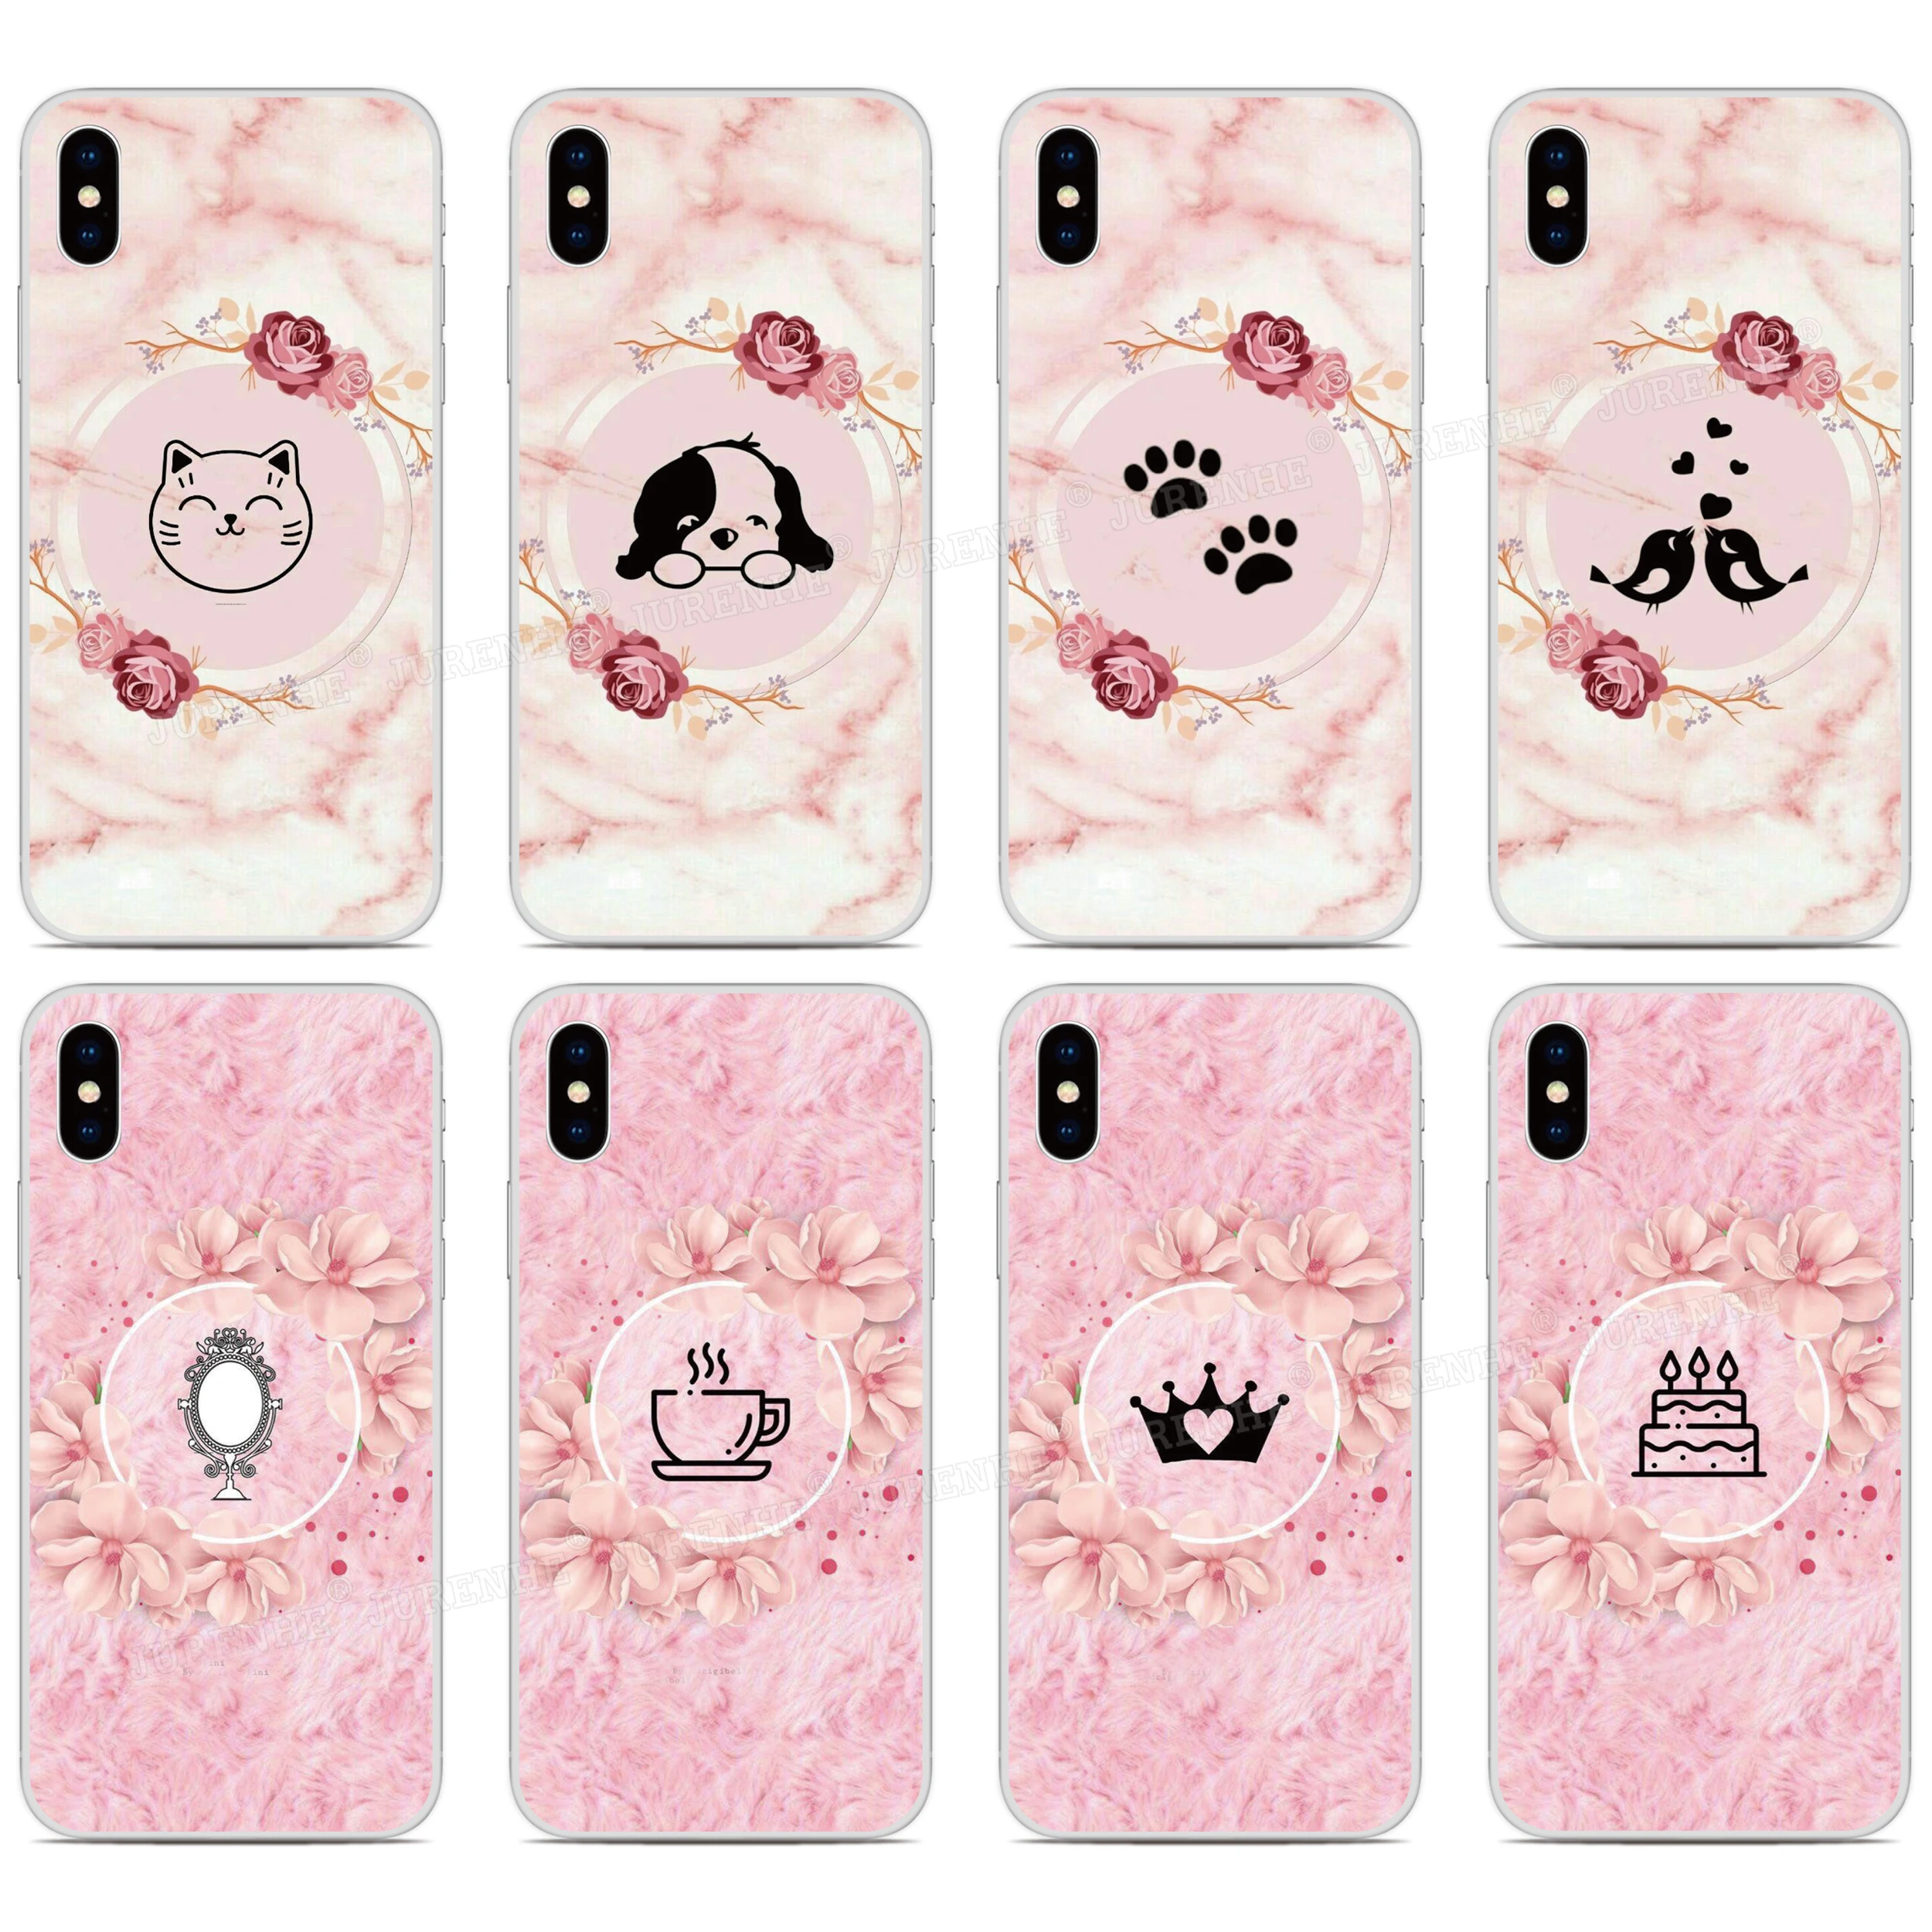 

Marble Pink Rose Silicone Cover For Umidigi Bison A7S A3X A3S F2 F1 Play X One Max A5 A3 A7 S3 S5 A9 Pro Power 3 Phone Case